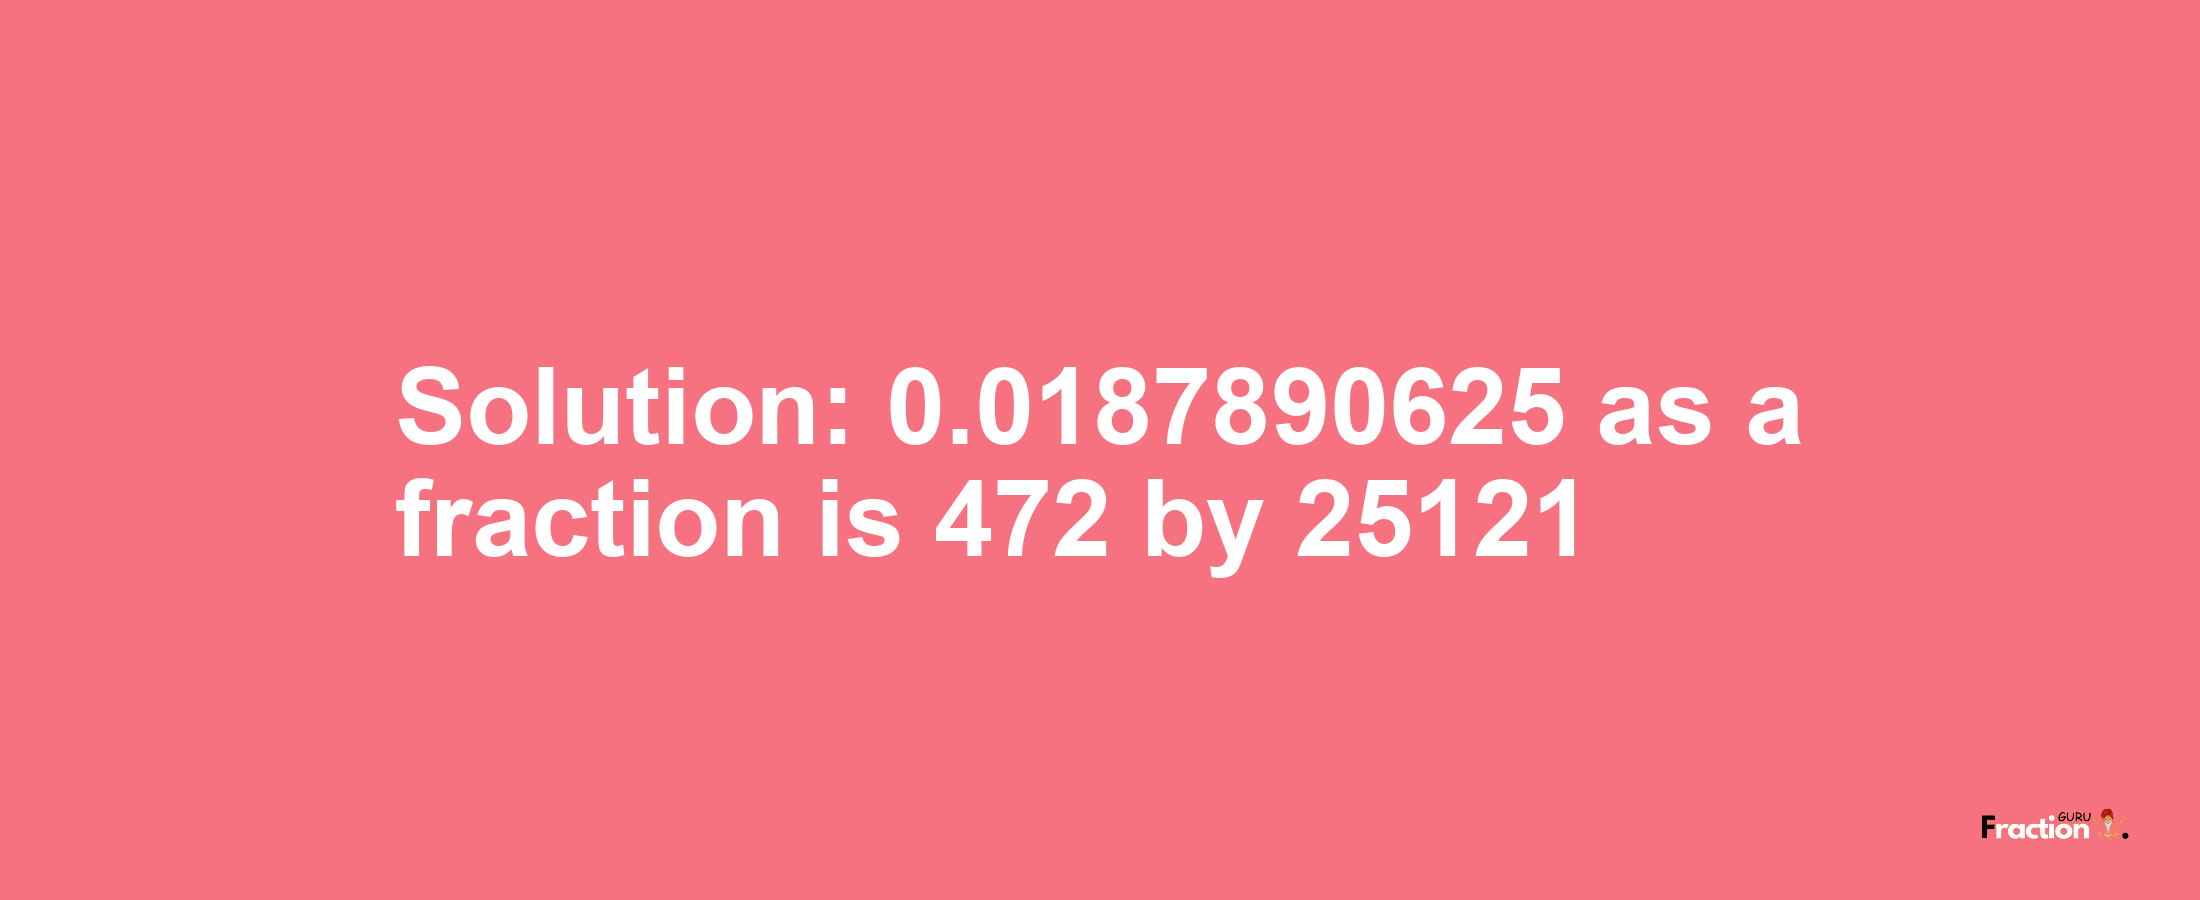 Solution:0.0187890625 as a fraction is 472/25121